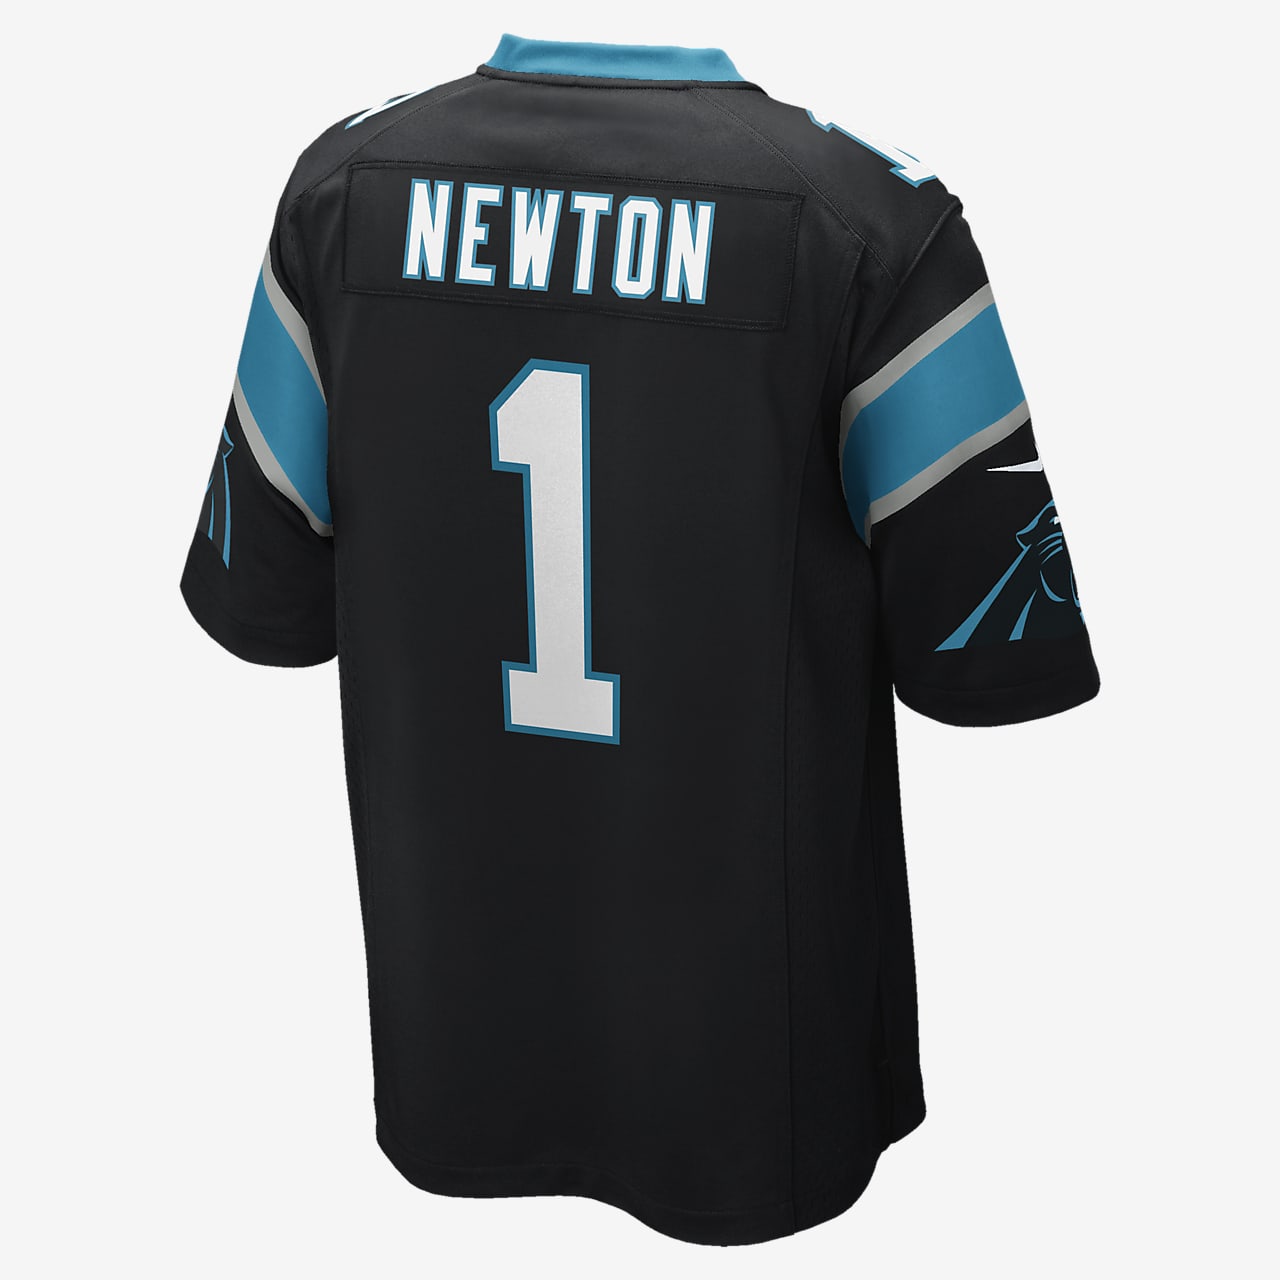 what is cam newton's jersey number